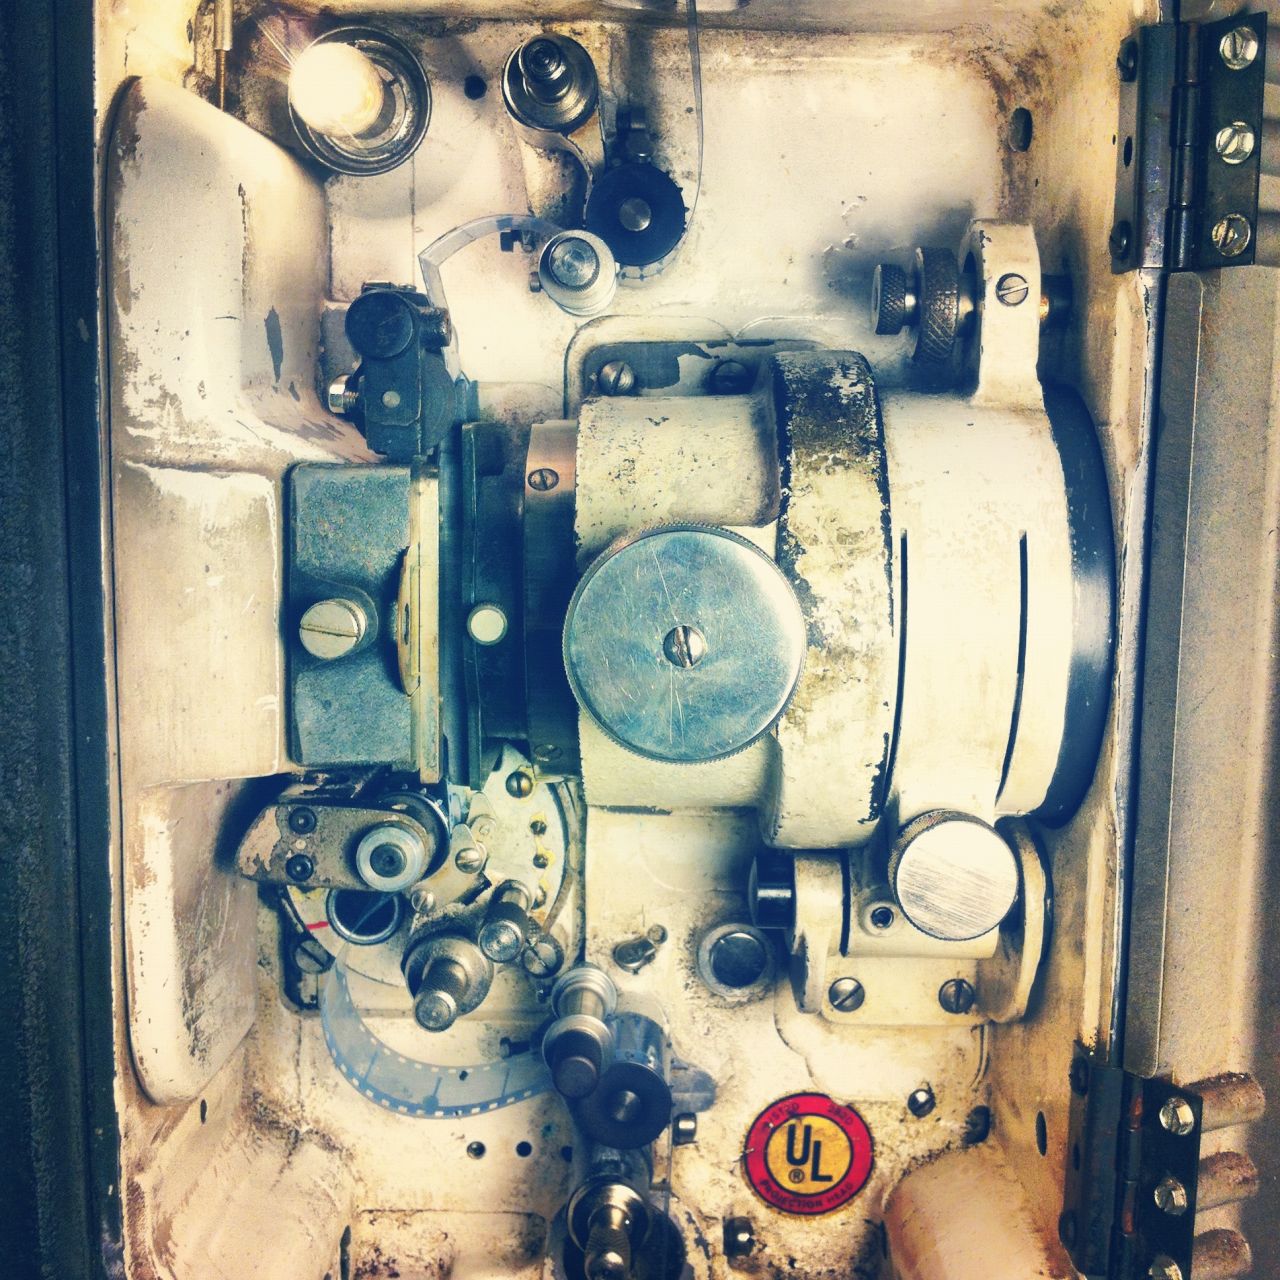 The inside of a Century JJ film projector, showing the gate and trap. Atlanta's Landmark Midtown Art Cinema, which used this projector, went digital last fall.